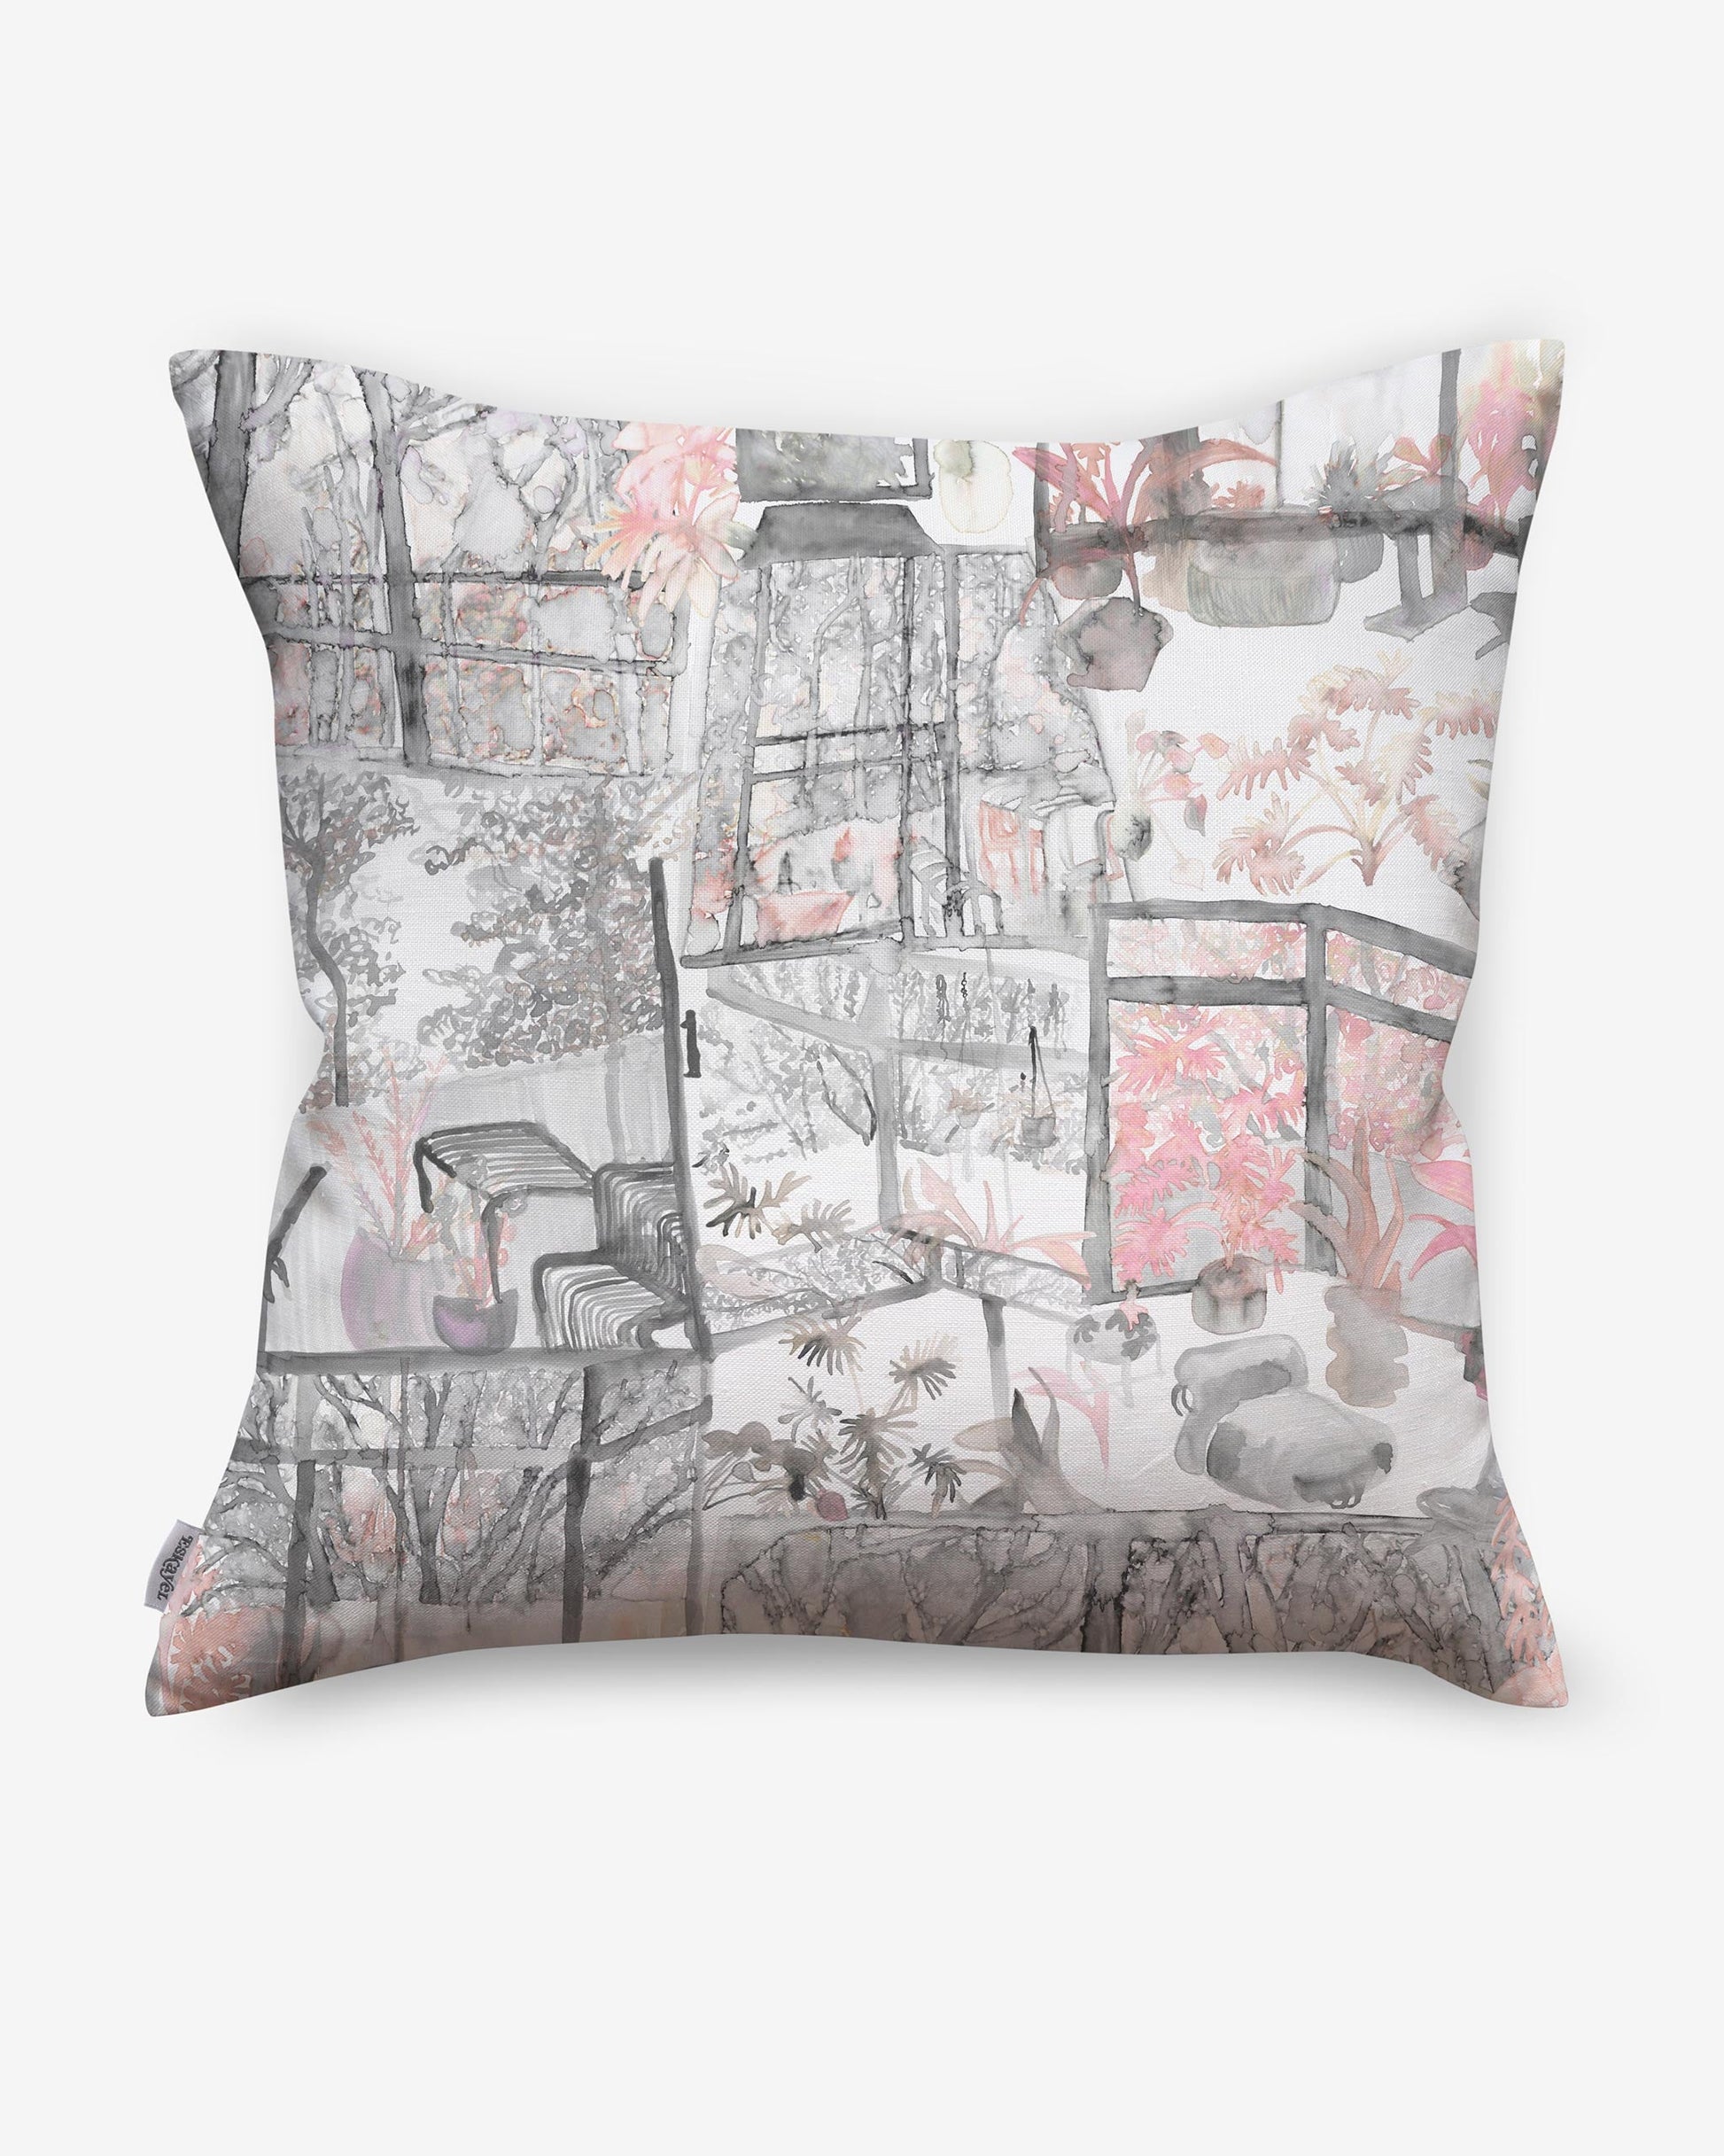 A Quotidiana Pillow Pink Island with a pink painting on it